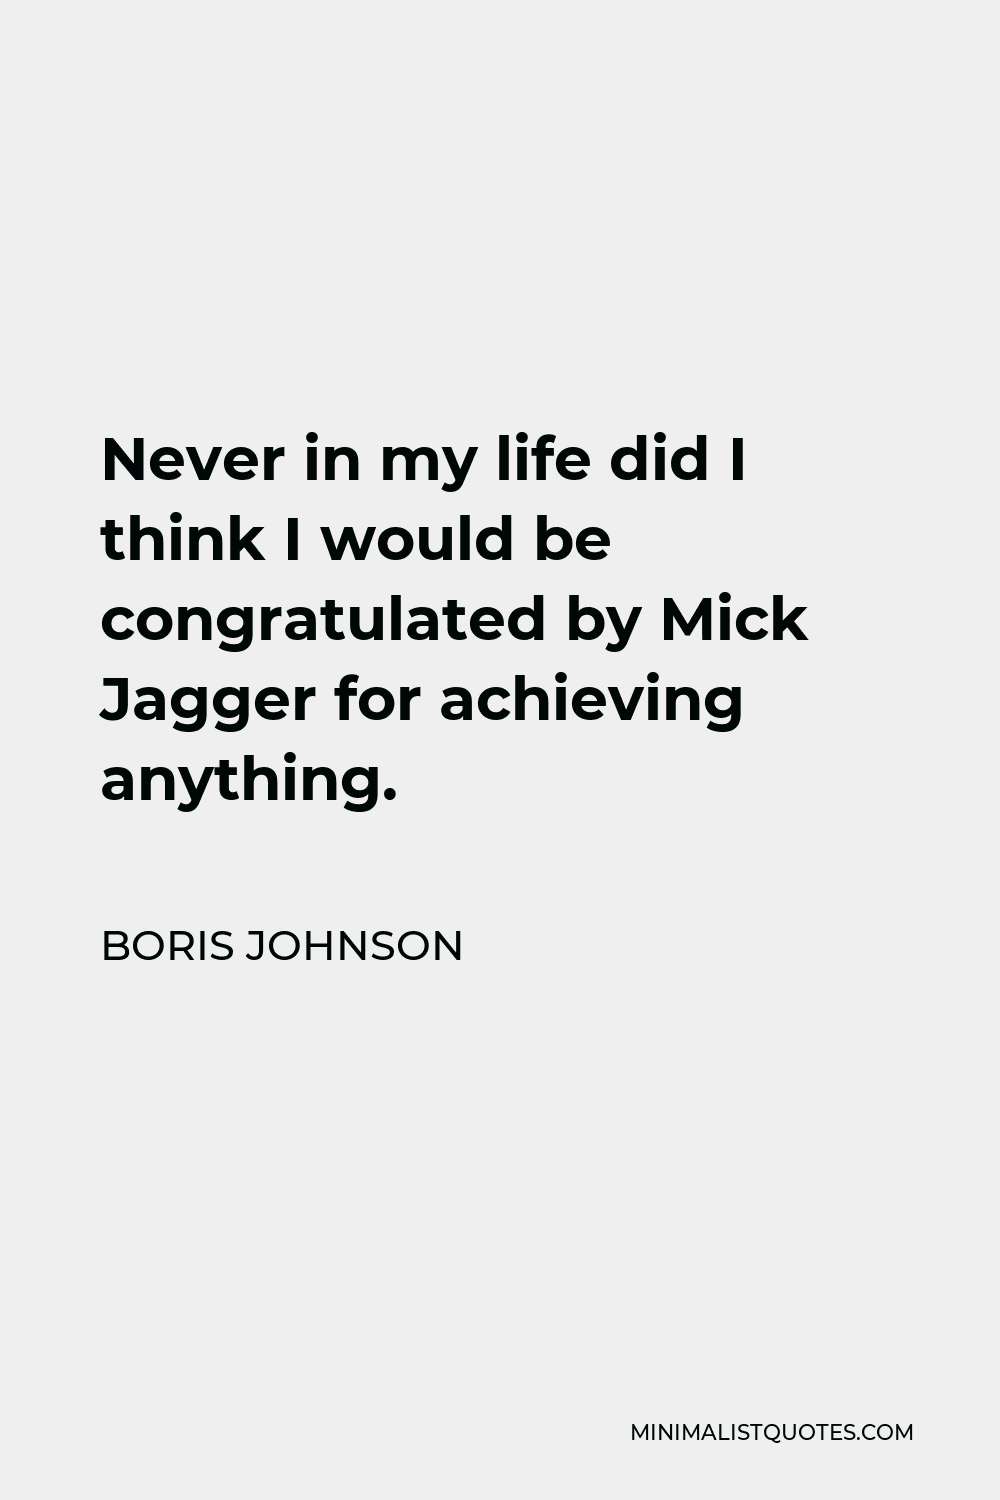 Boris Johnson Quote - Never in my life did I think I would be congratulated by Mick Jagger for achieving anything.